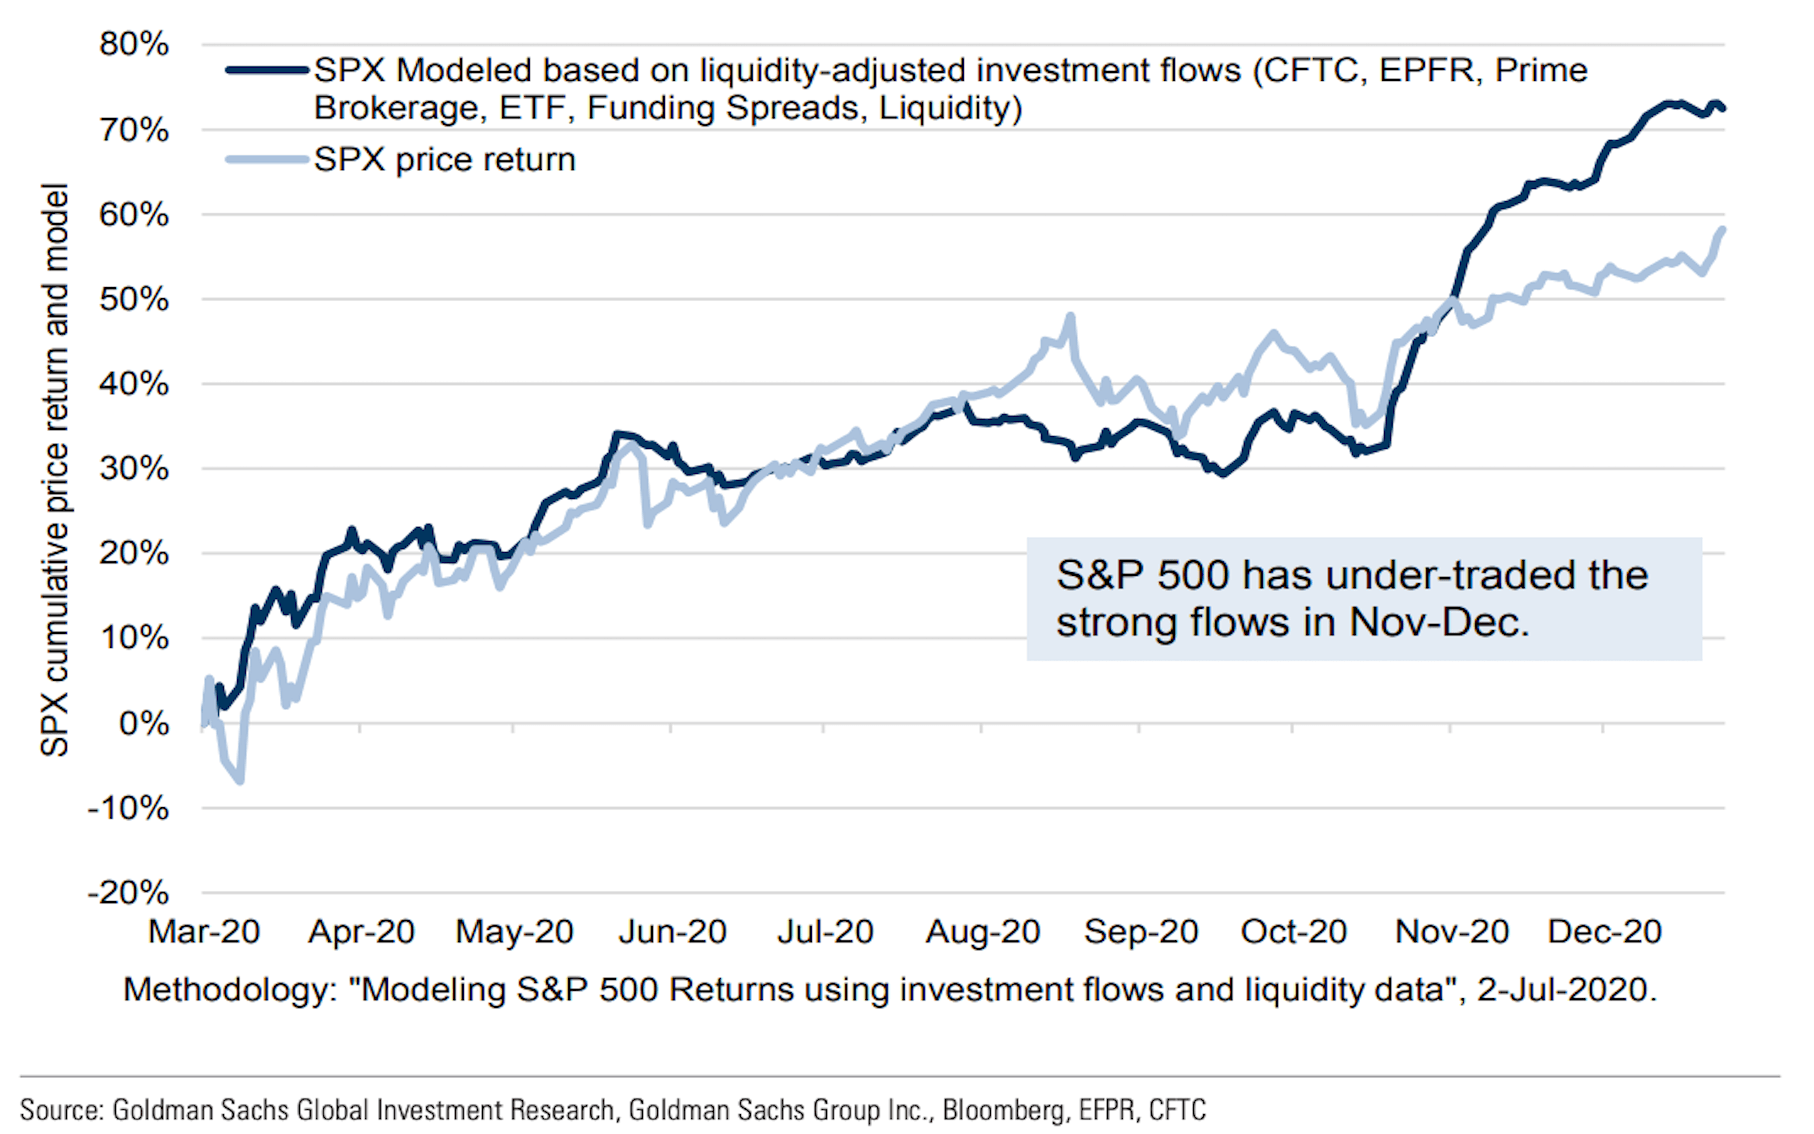 Goldman’s flow model says the S&P 500 should be 10% higher